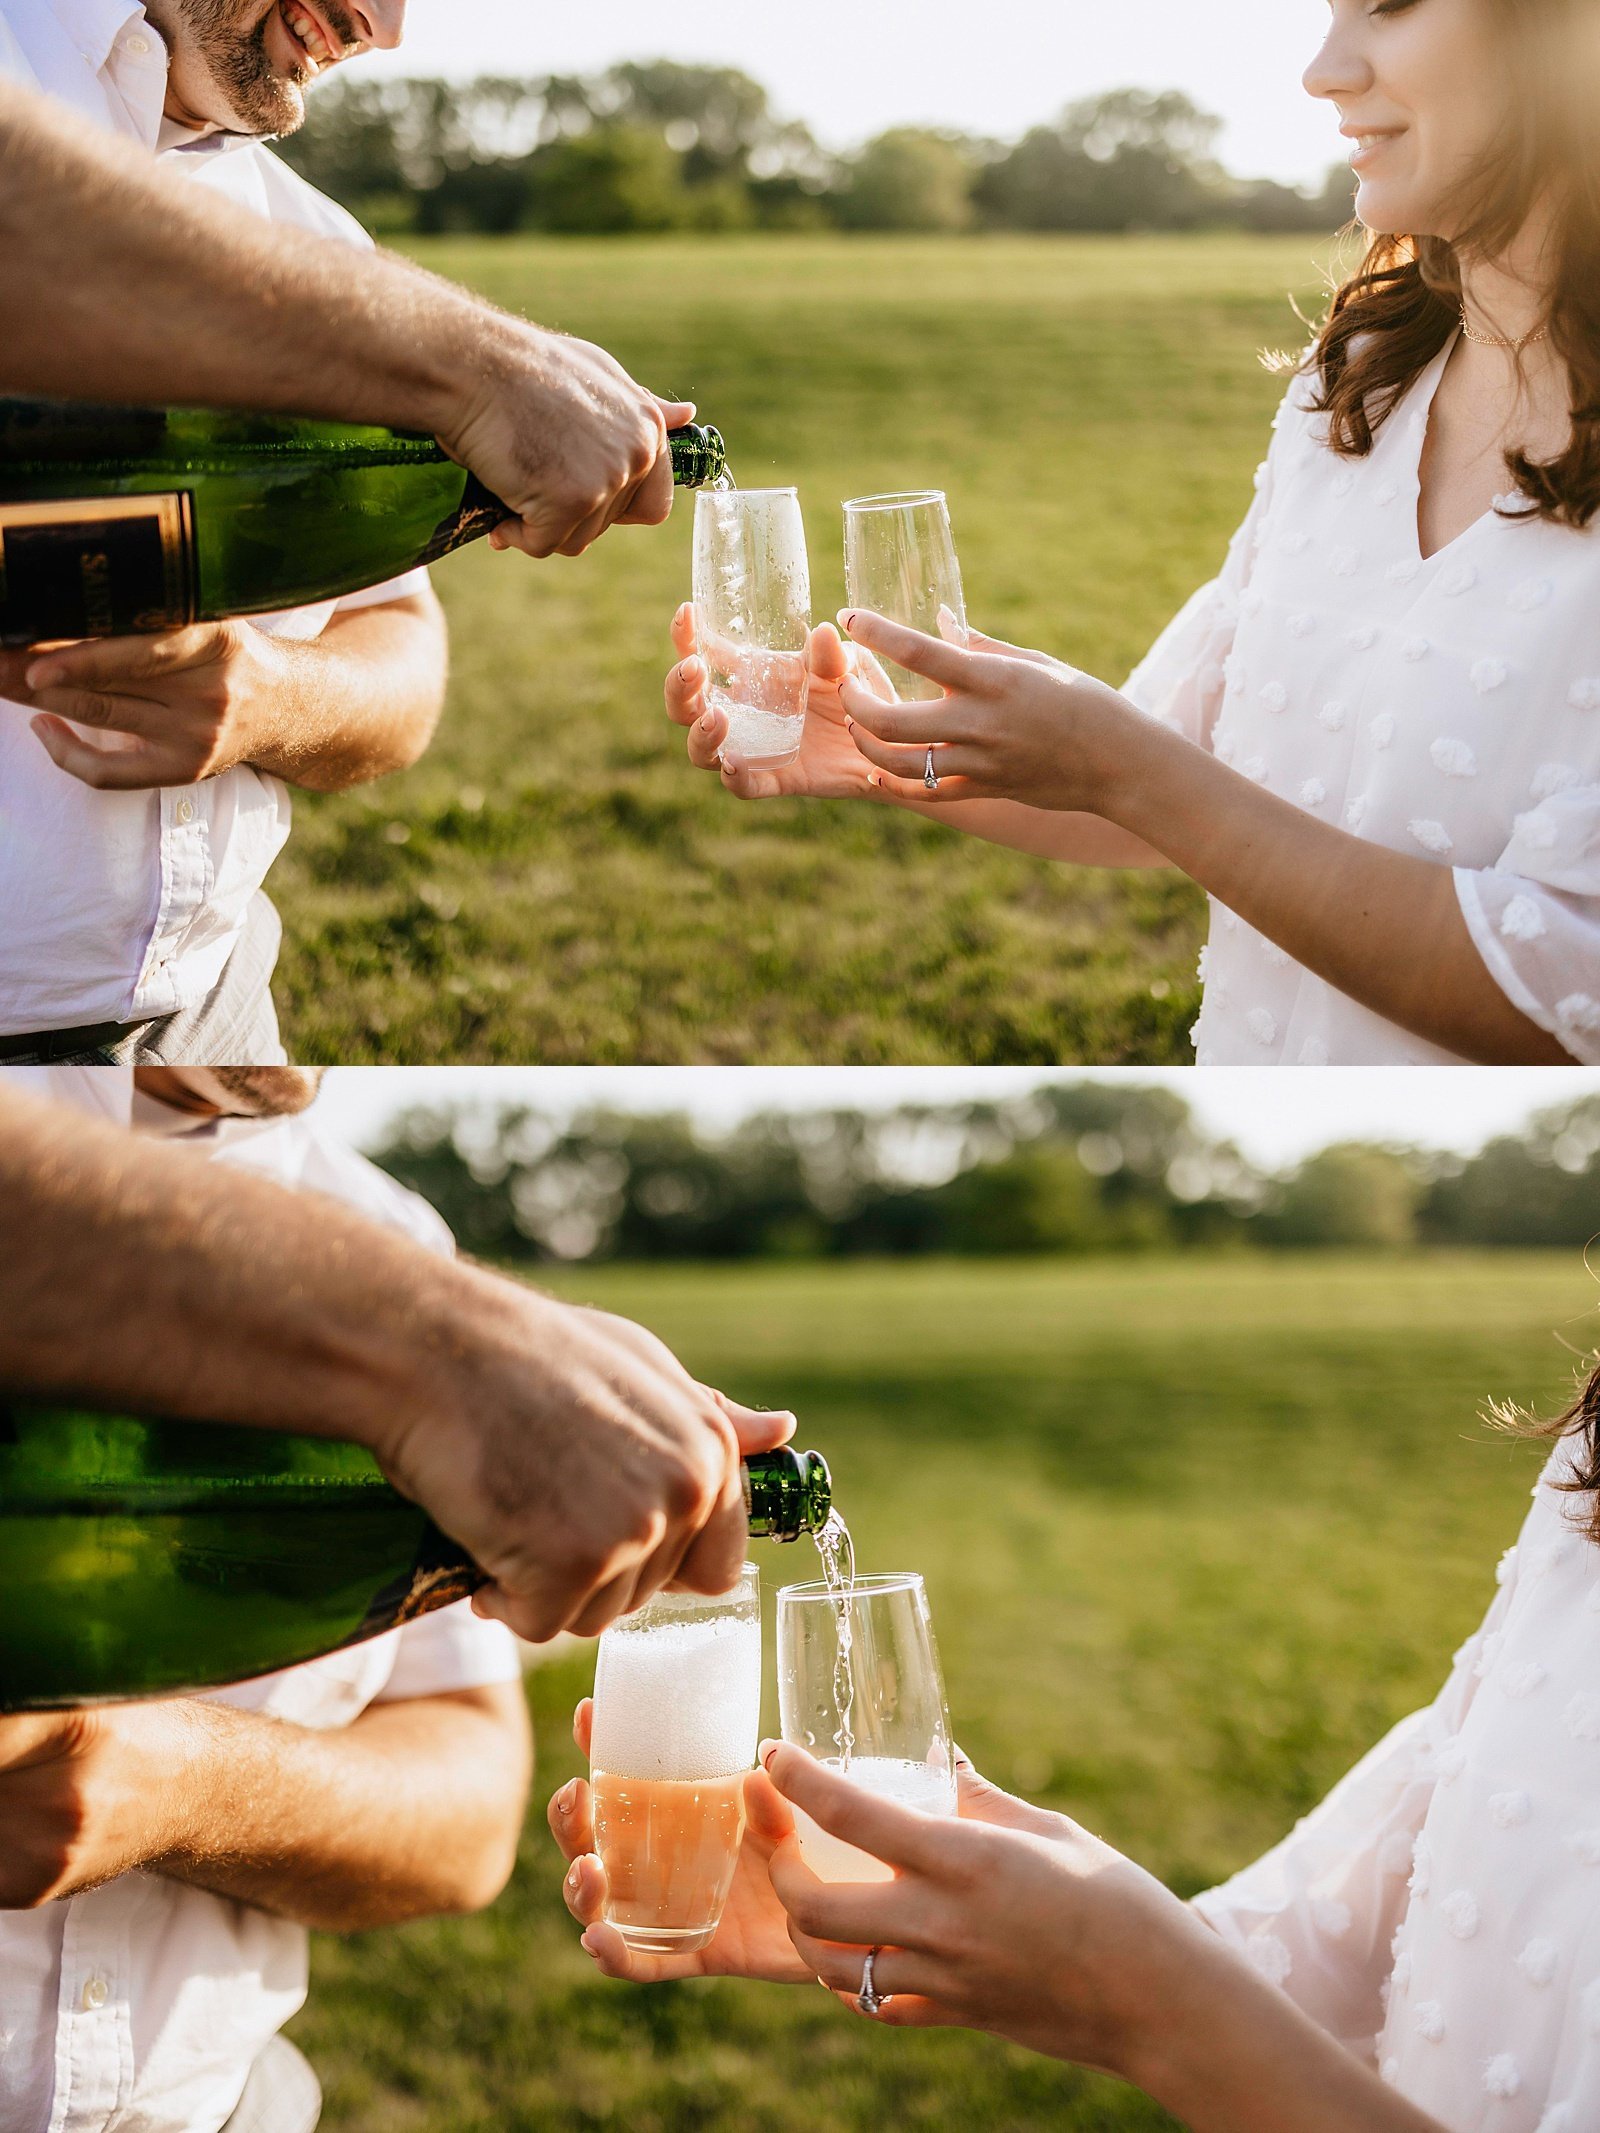  Man pouring champagne into glasses a woman is holding in a field in Minnesota.  